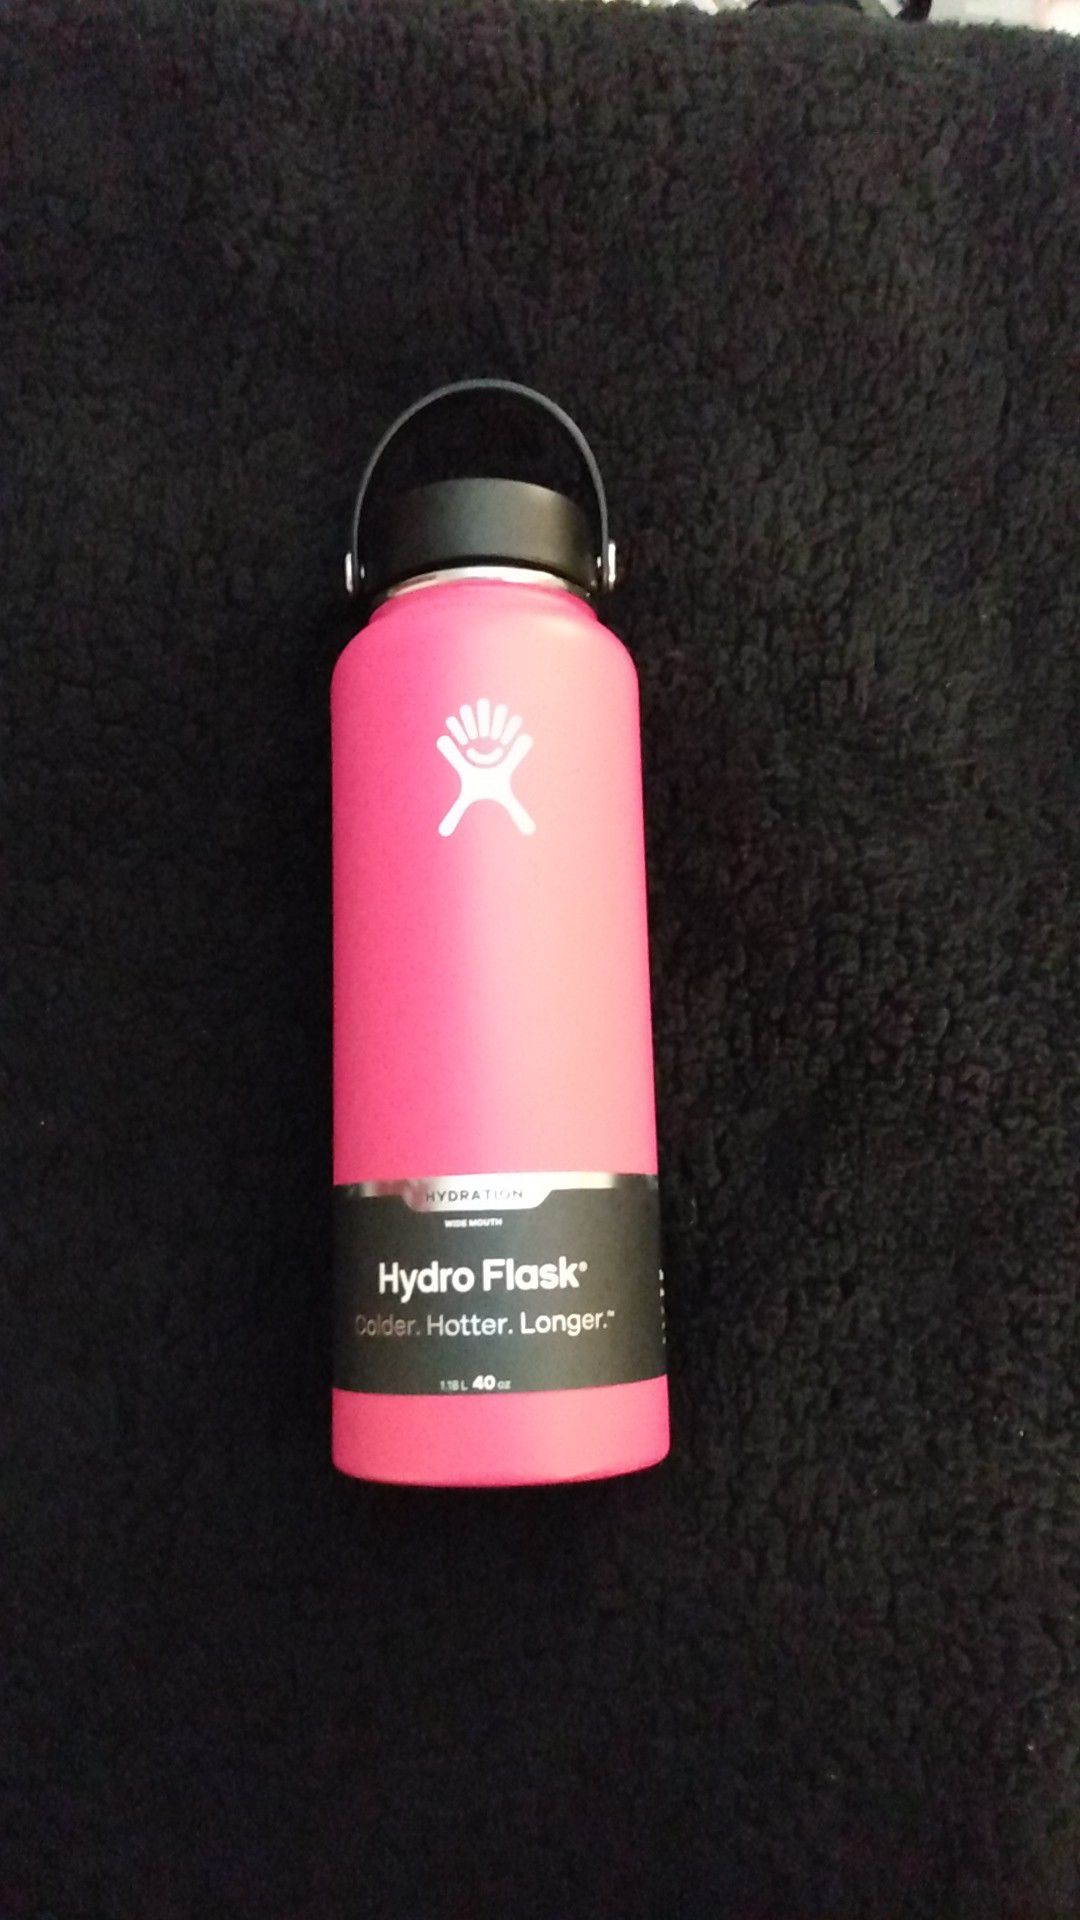 Hydro Flask WIDE MOUTH 40 oz Stainless Steel Bottle in a Watermelon Color Was 42.95 Now 22.95